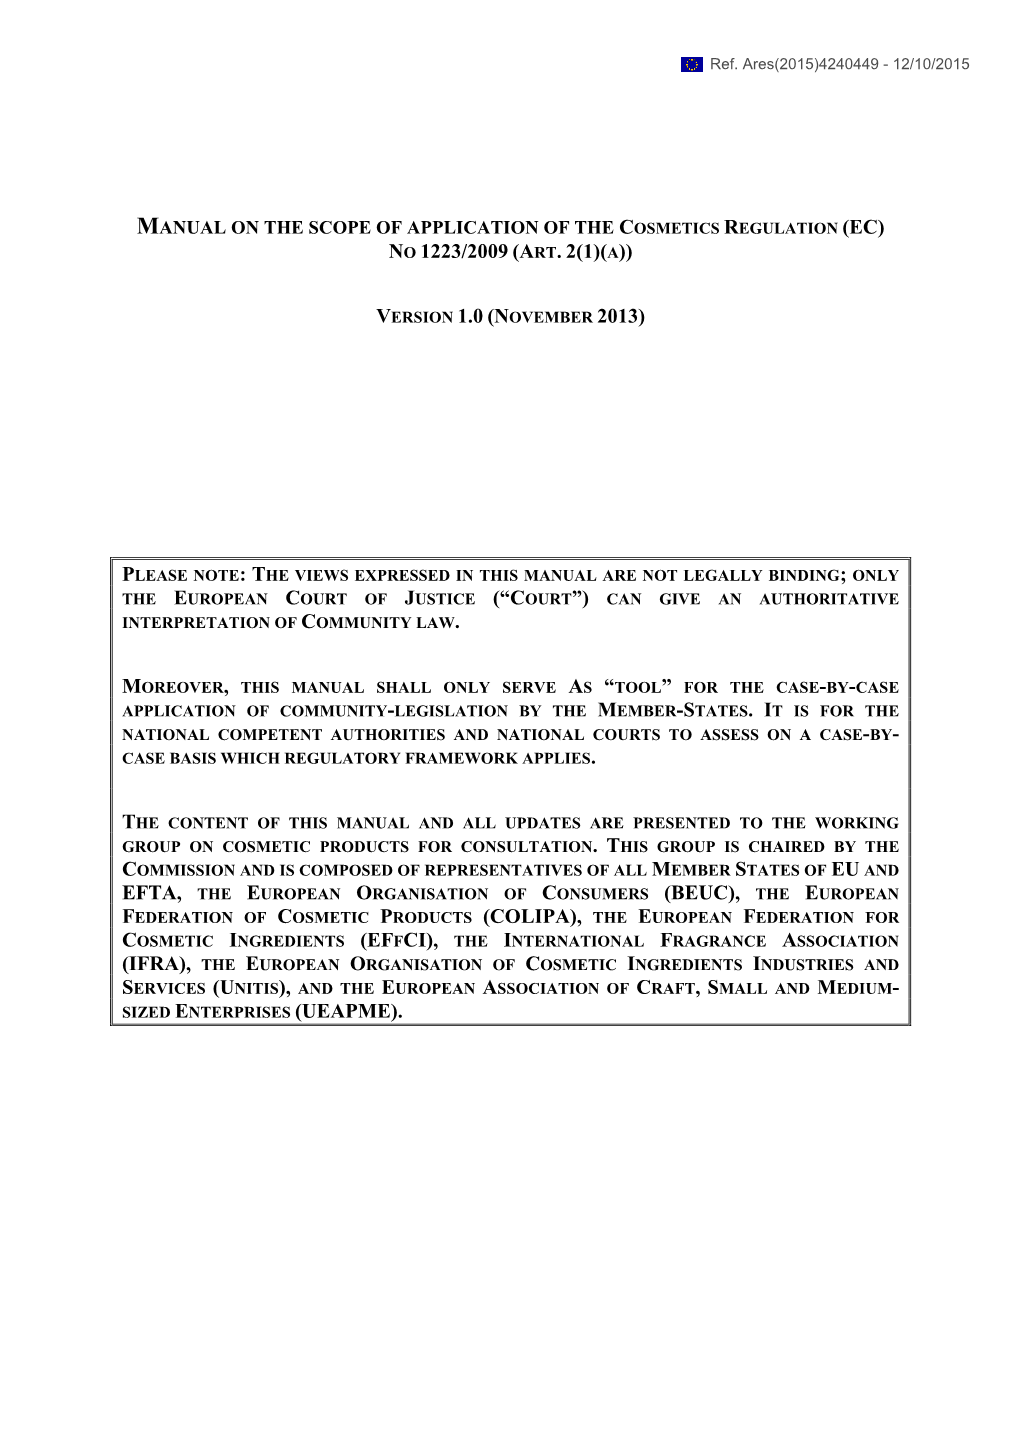 Manual on the Scope of Application of the Cosmetics Regulation (Ec) No 1223/2009 (Art